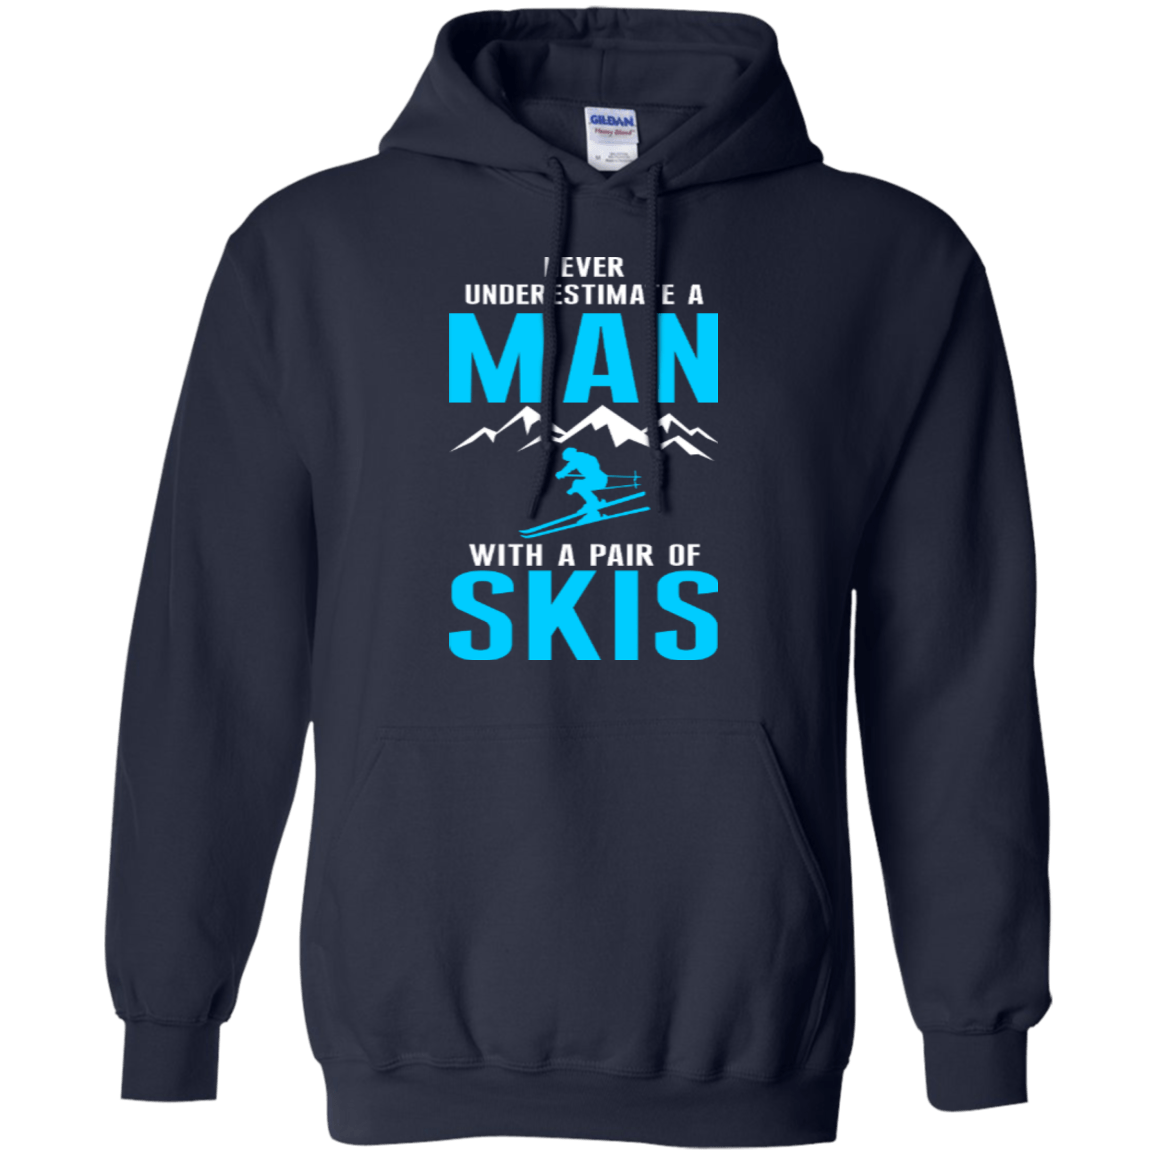 Never Underestimate A Man With A Pair Of Skis Hoodies - Powderaddicts